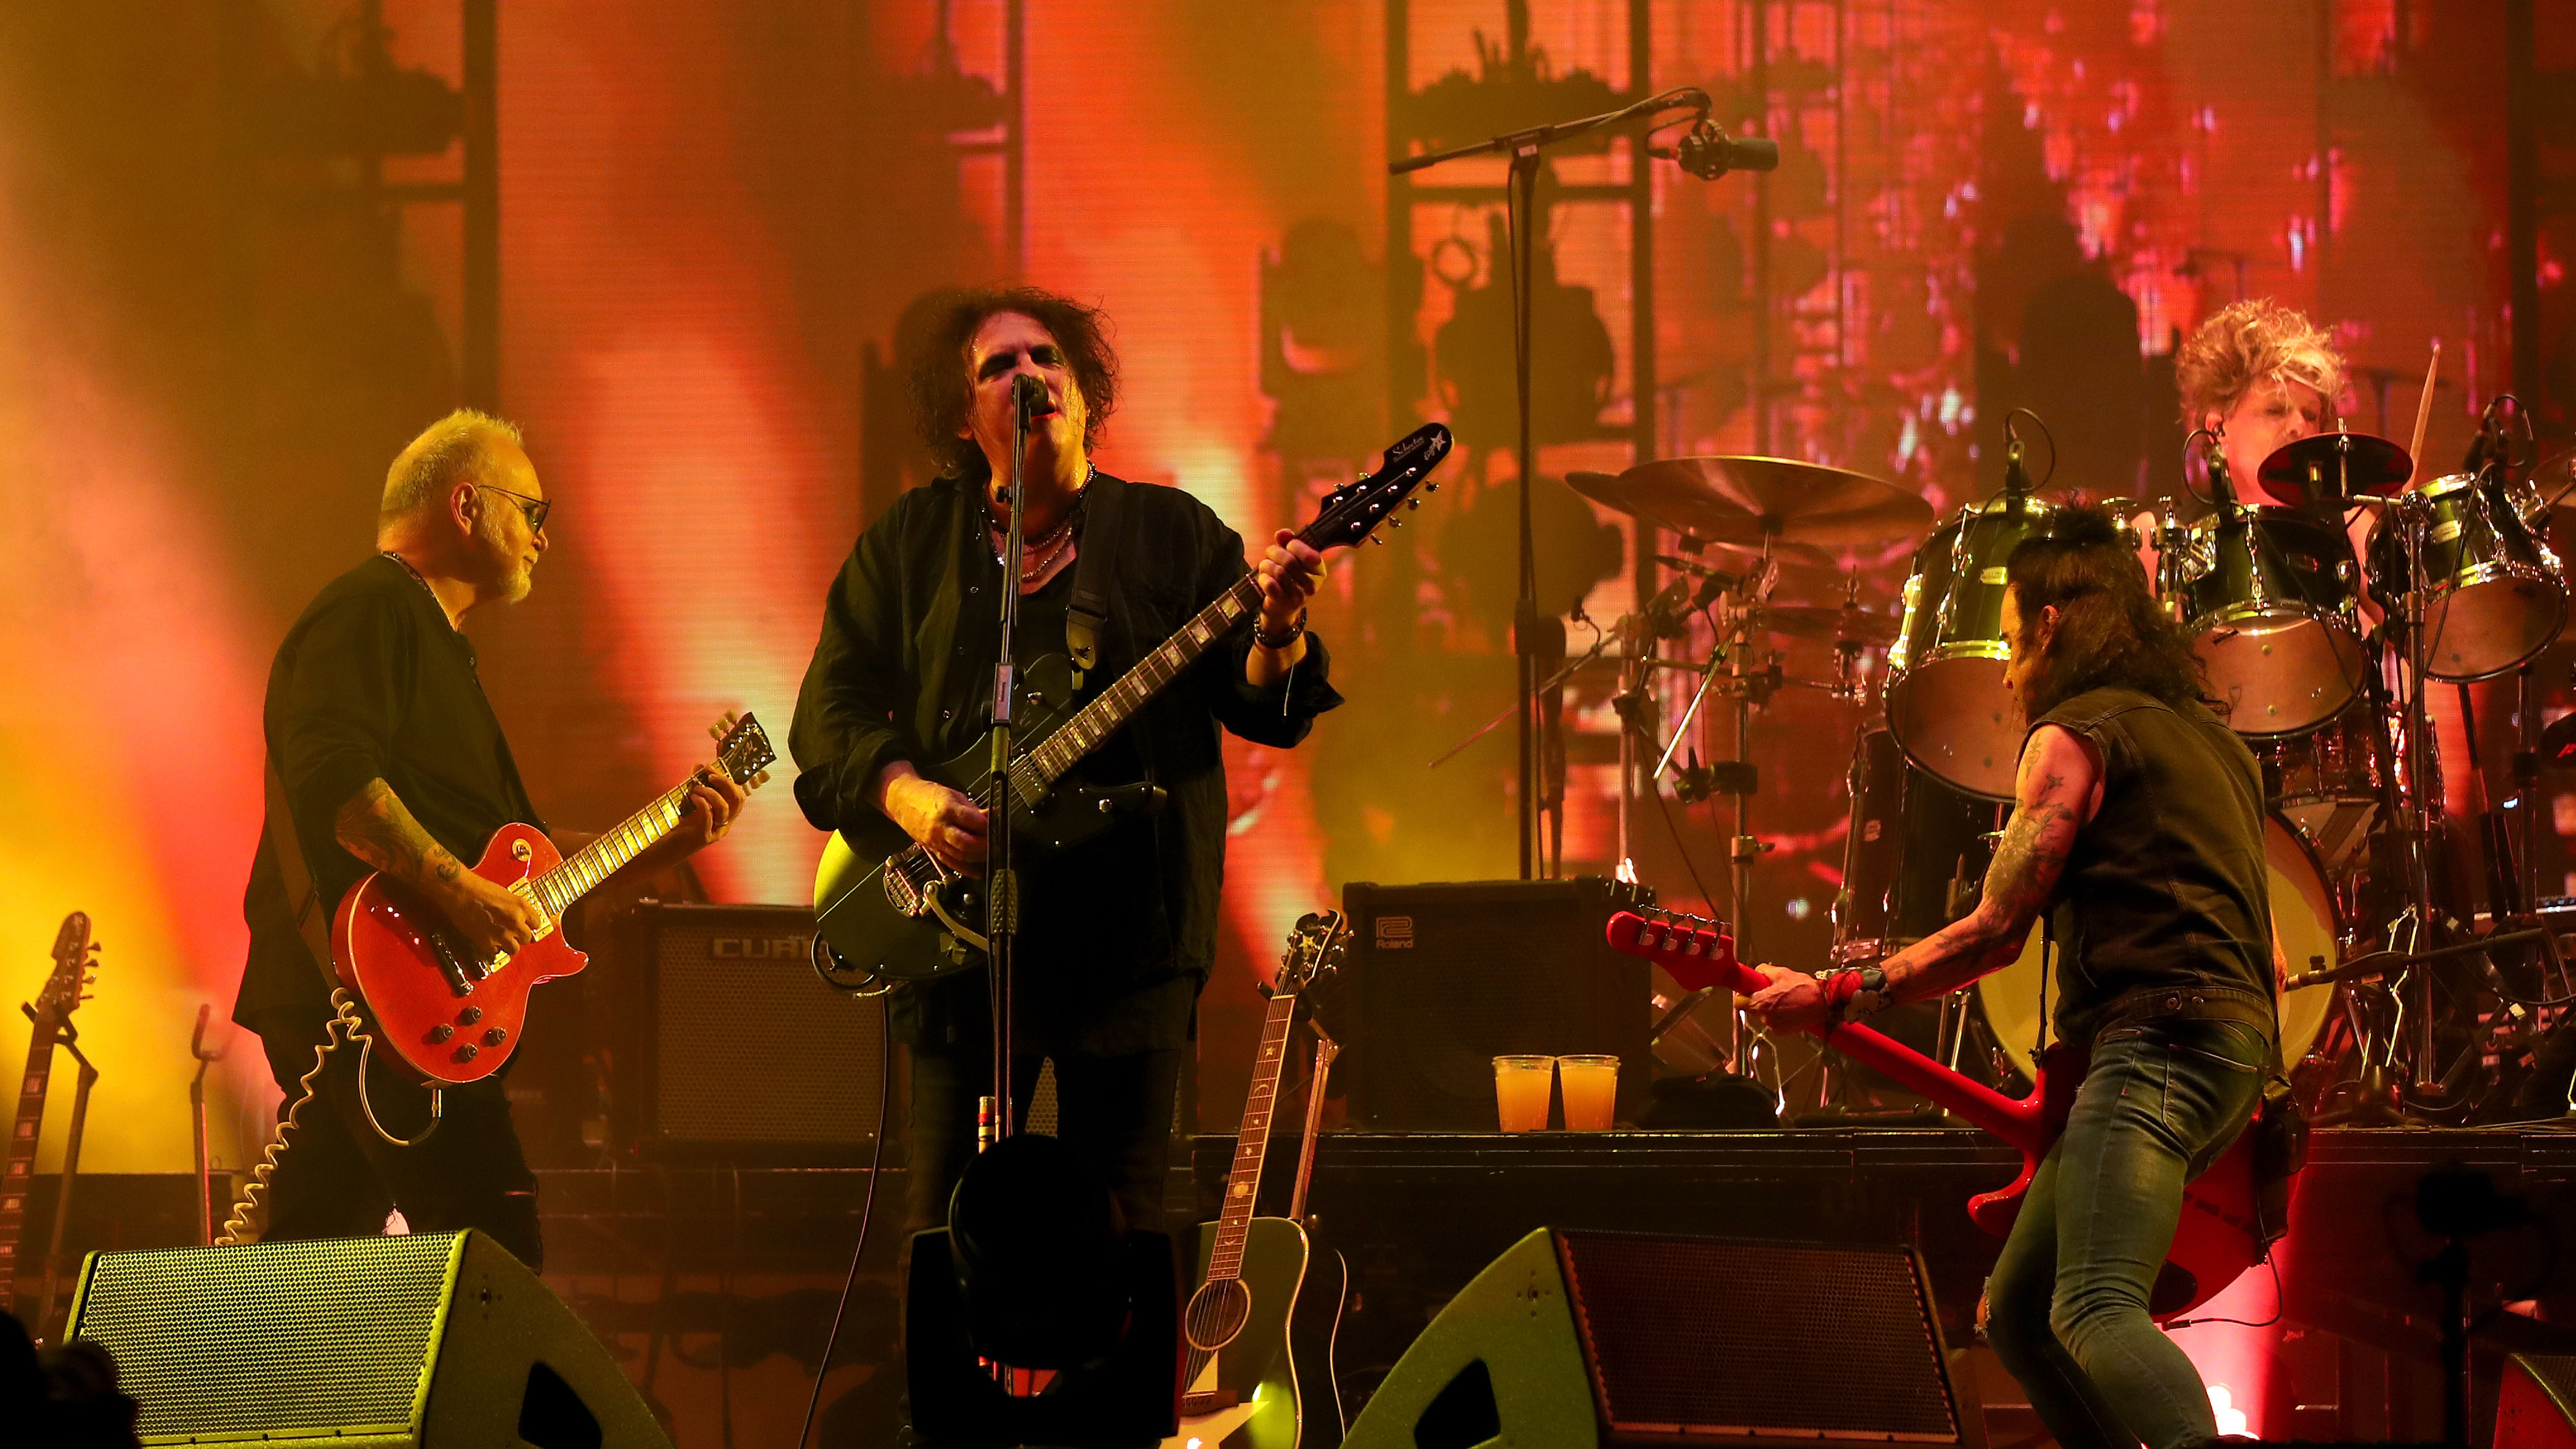 The Cure debut two new songs and the return of a former member during